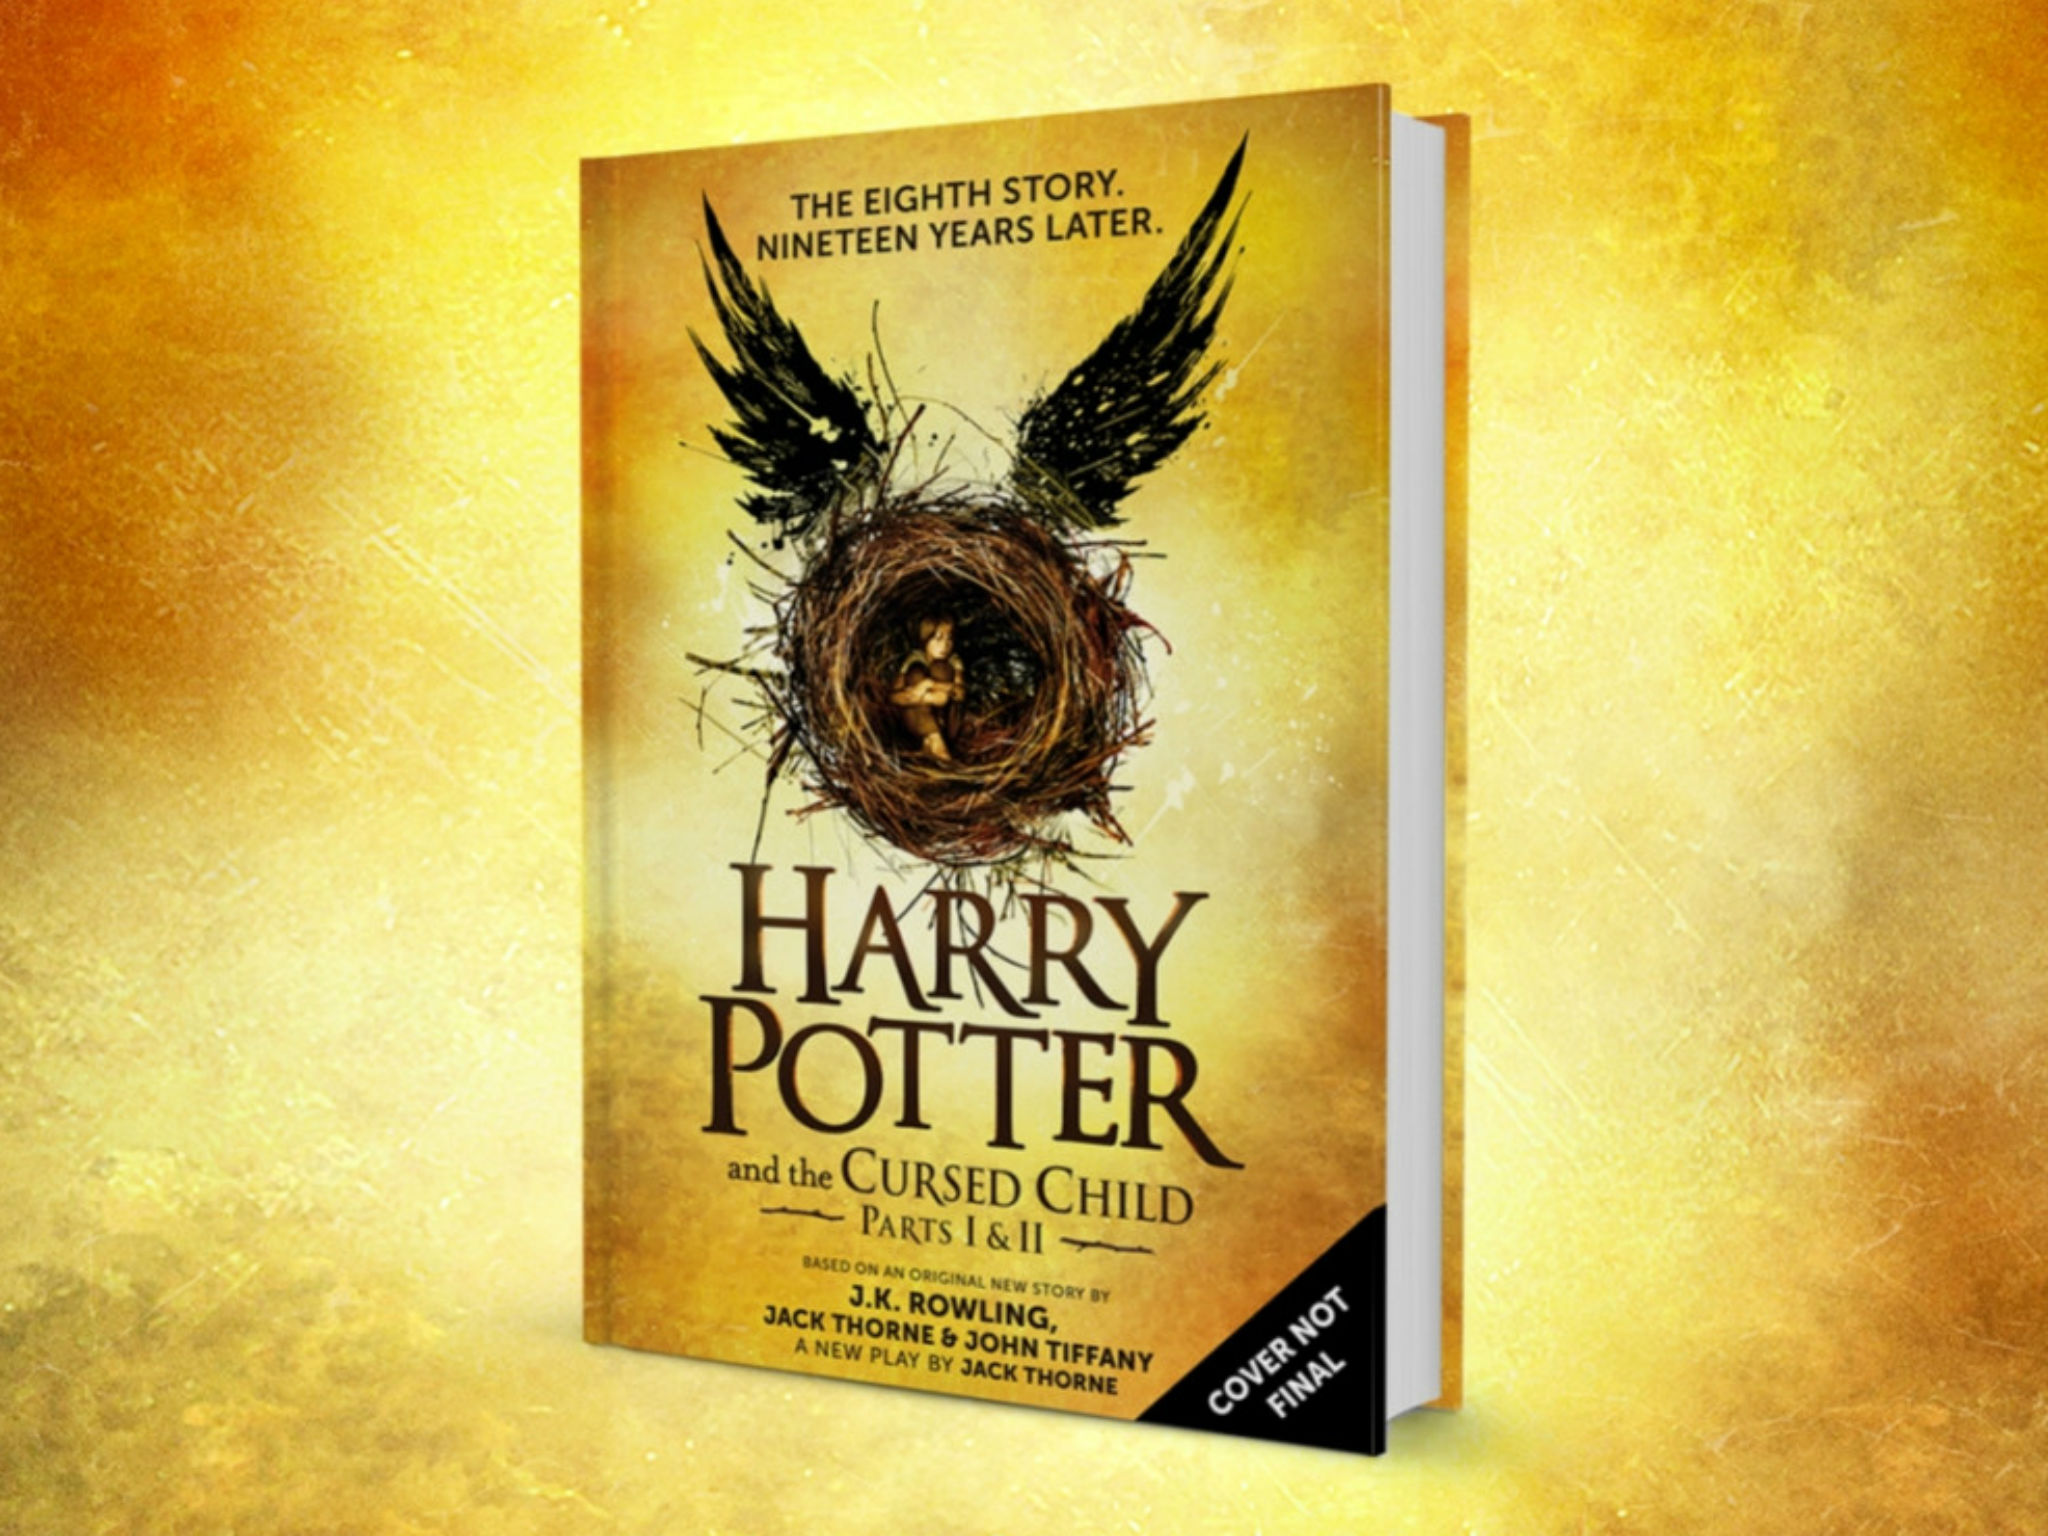 Harry Potter and the Cursed Child book cover